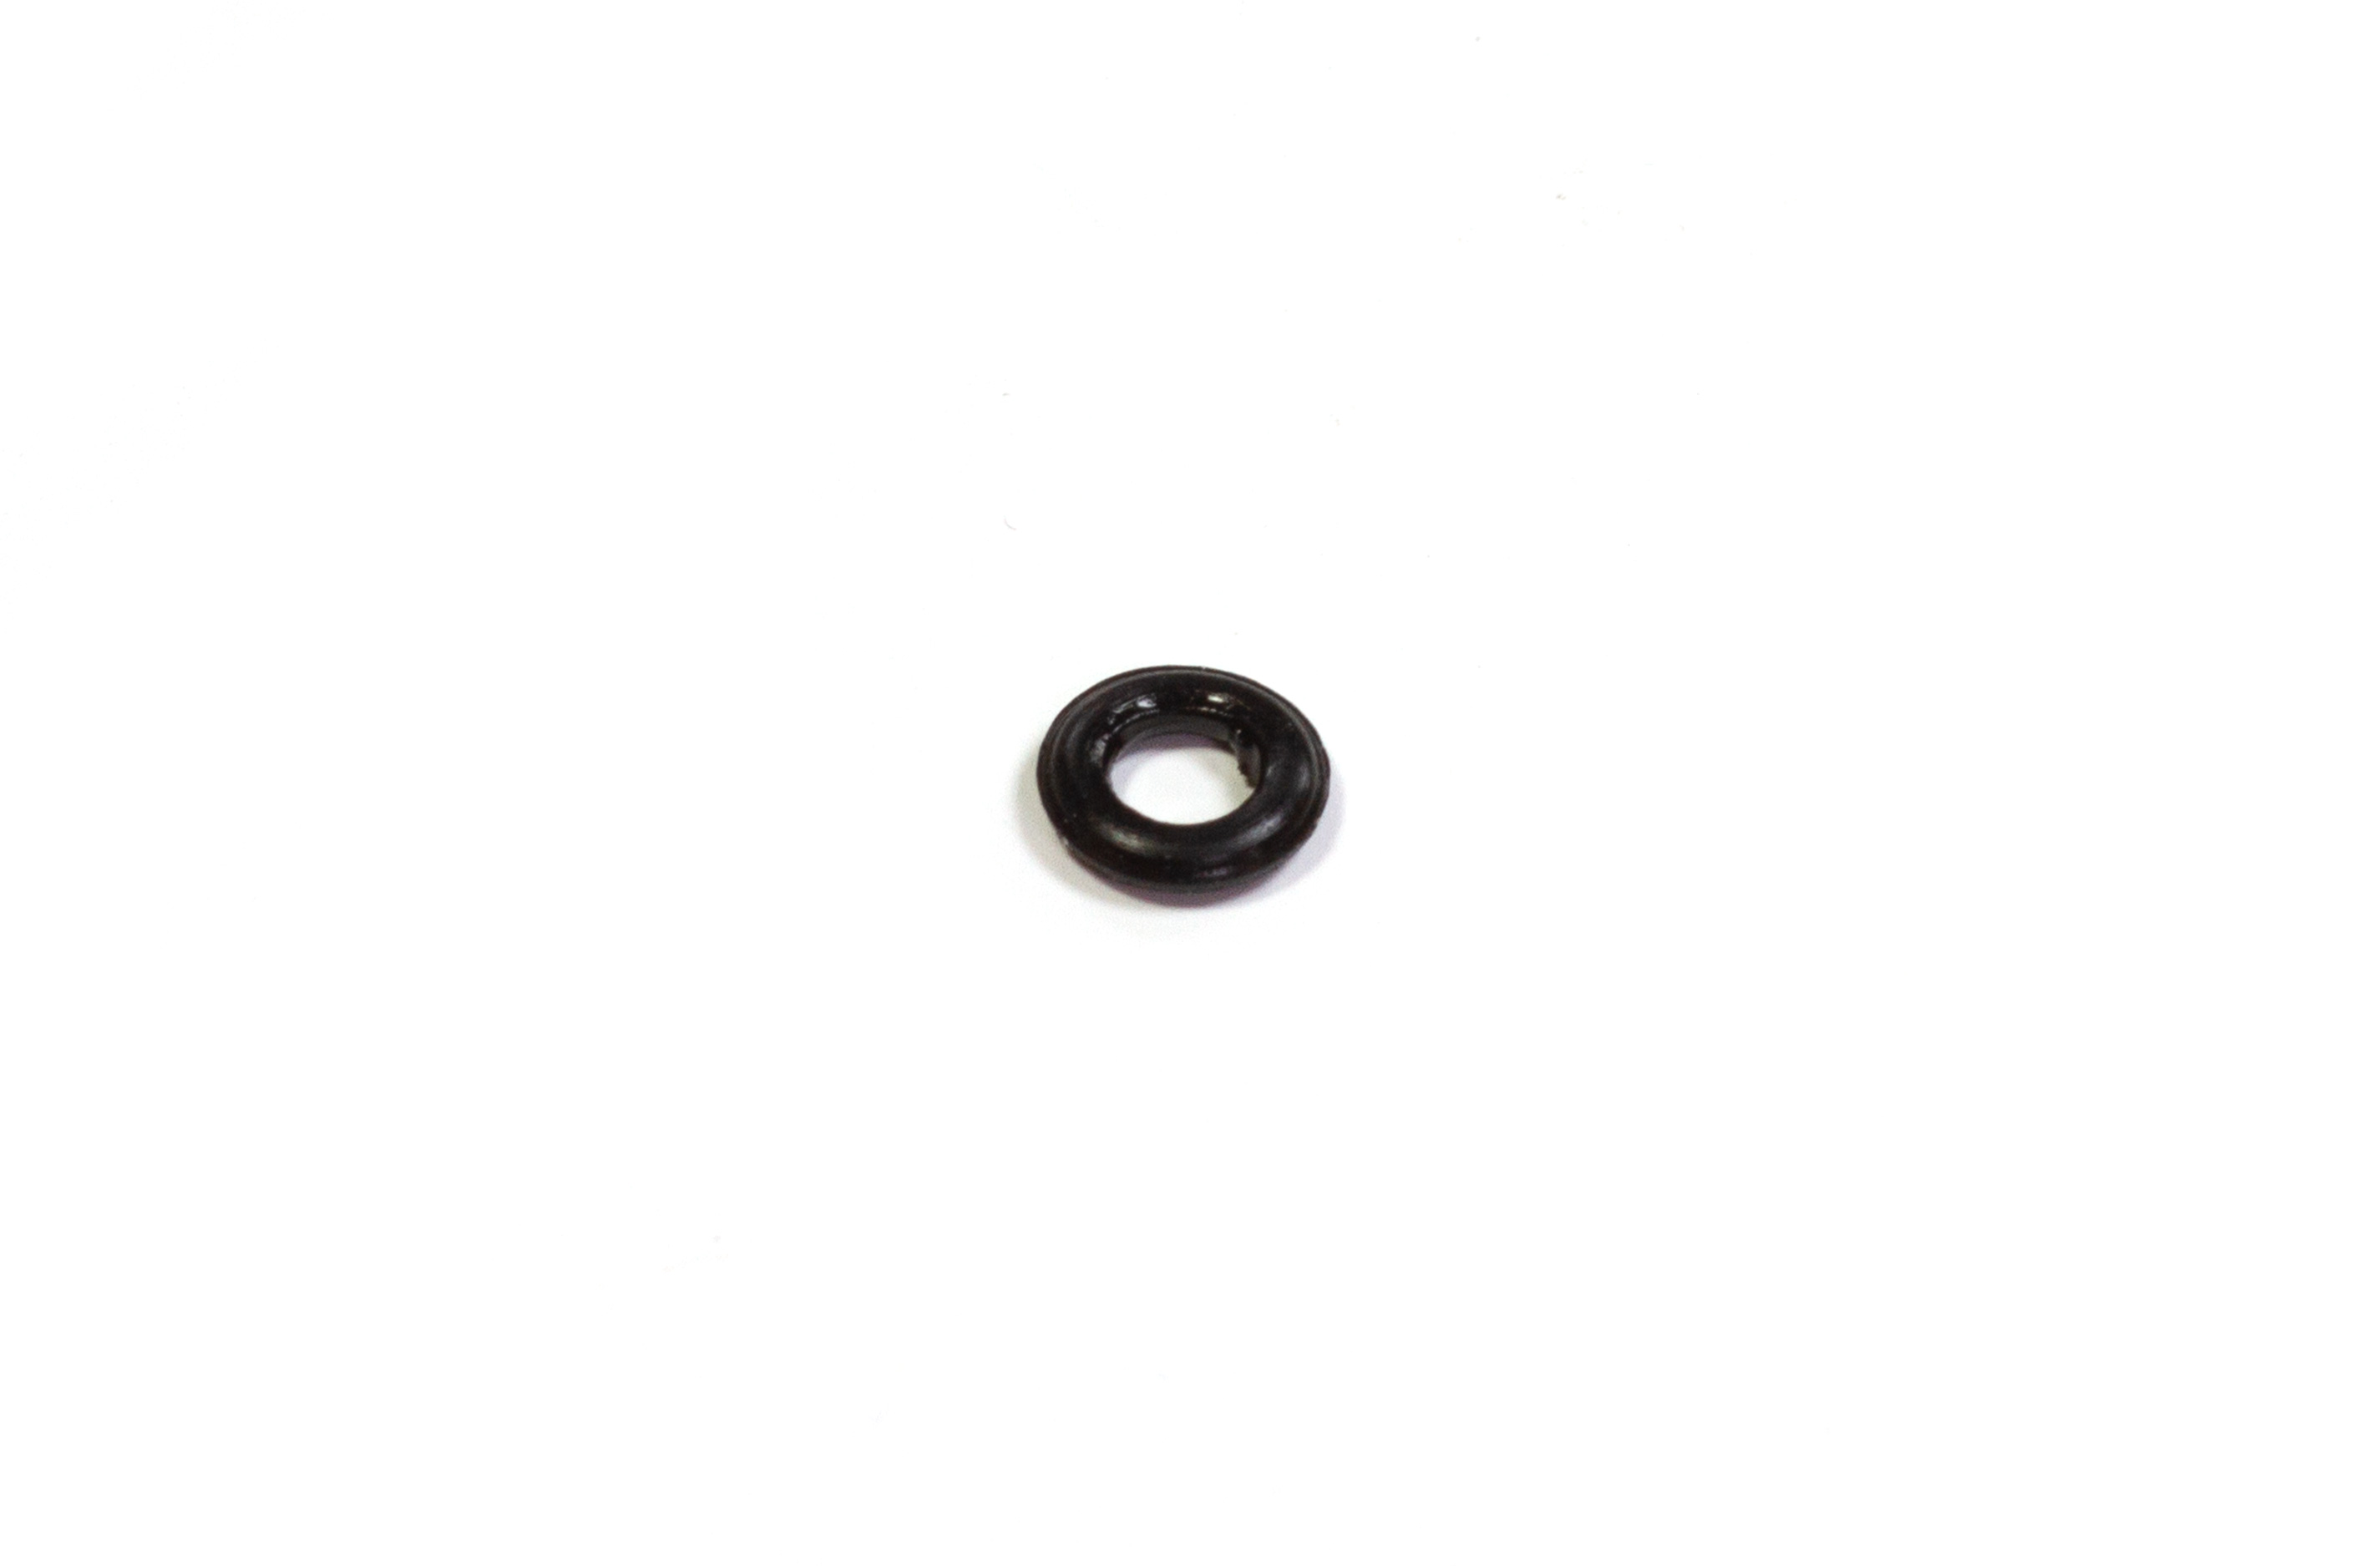 AKX177/187-05 GPM O-Ring for bleed screw for GPM Arrma shocks